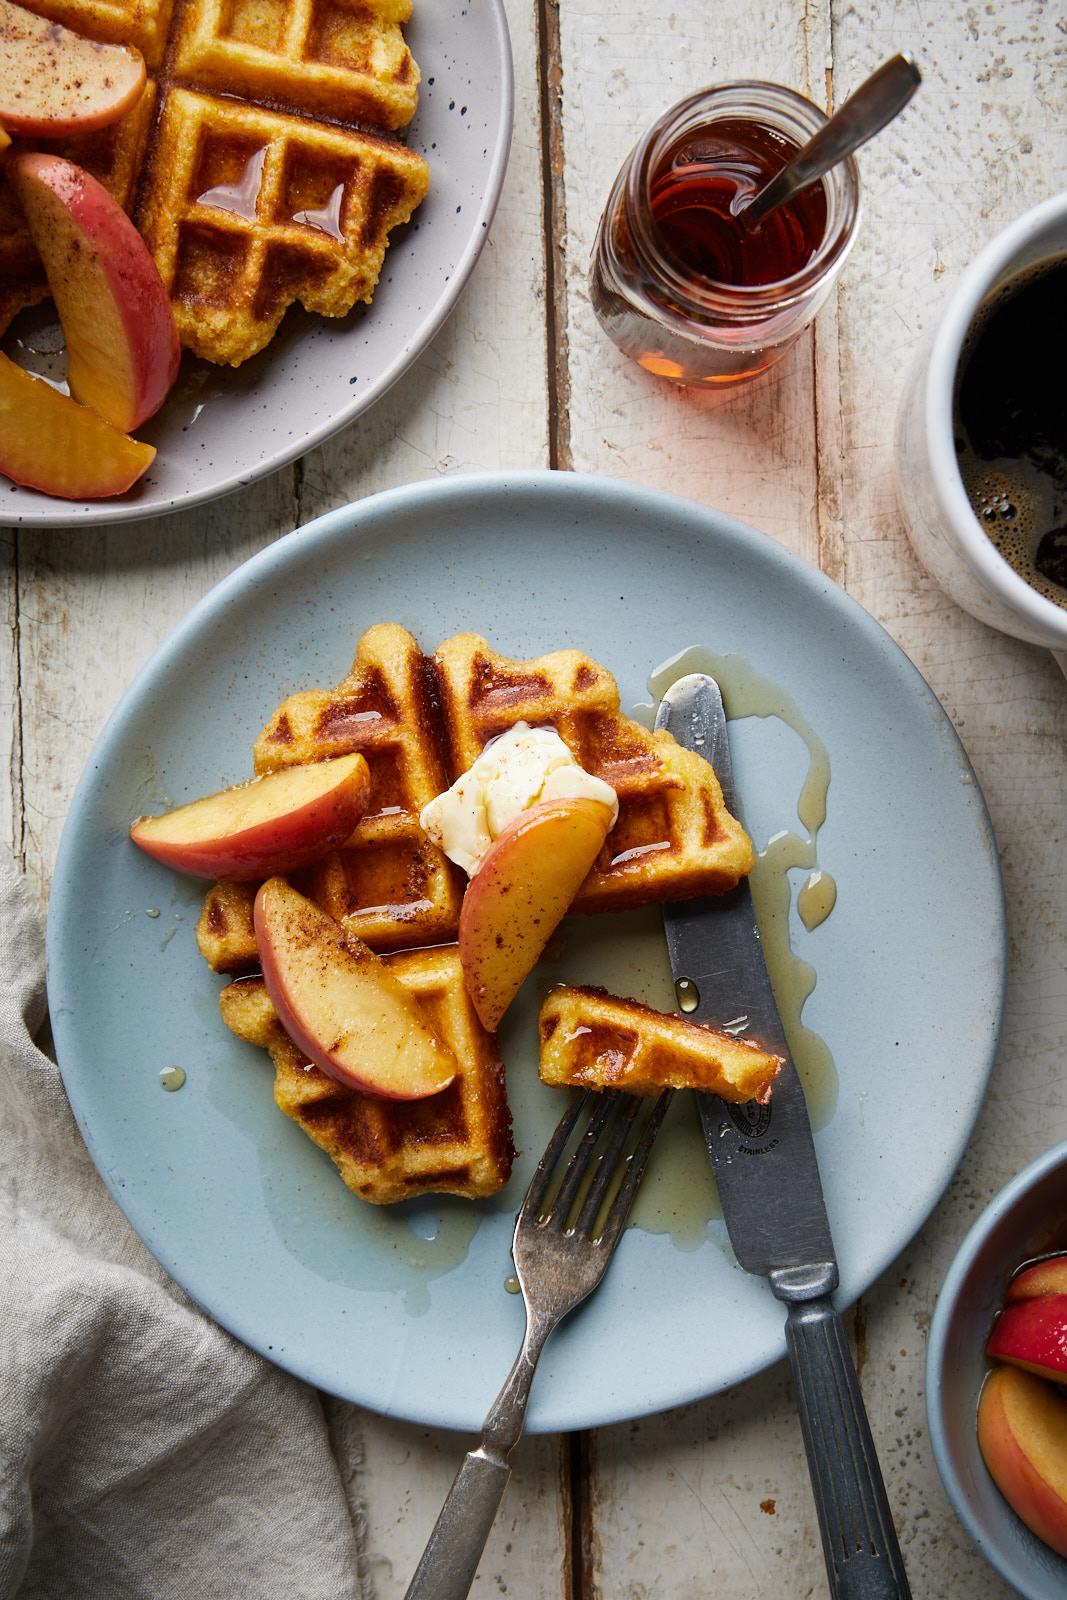 Corn Waffles With Caramelized Apples